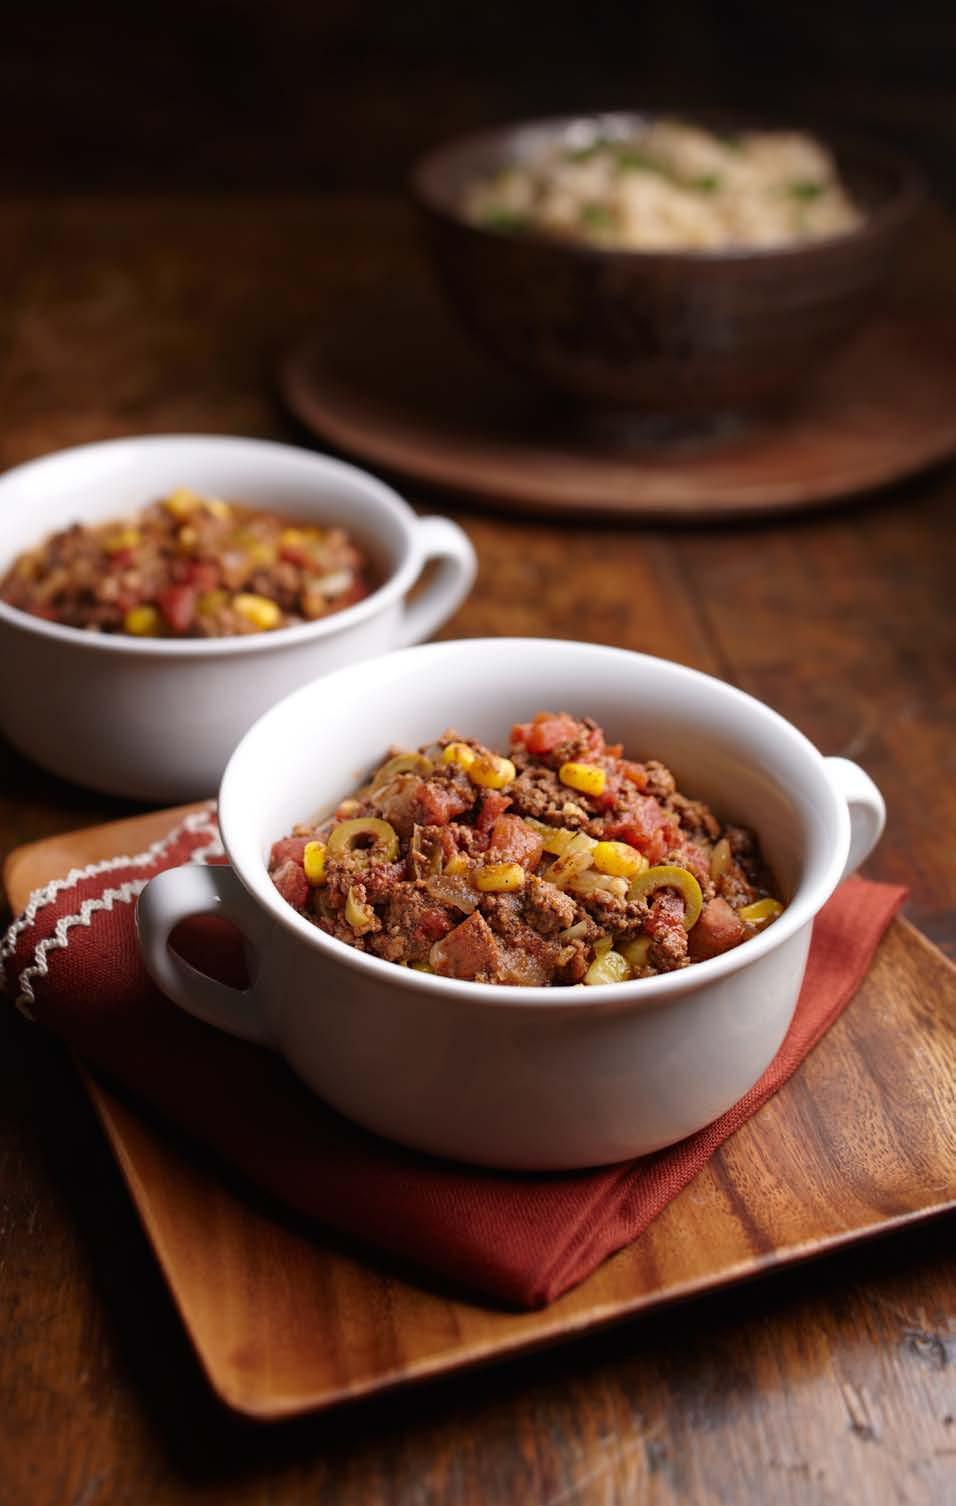 Slow-Cooker Picadillo Makes: 8 servings, generous 1 cup each Active time: 40 minutes Slow-cooker time: 4-8 hours To prep ahead: Prepare through Step 3; cover and refrigerate the mixture in a large